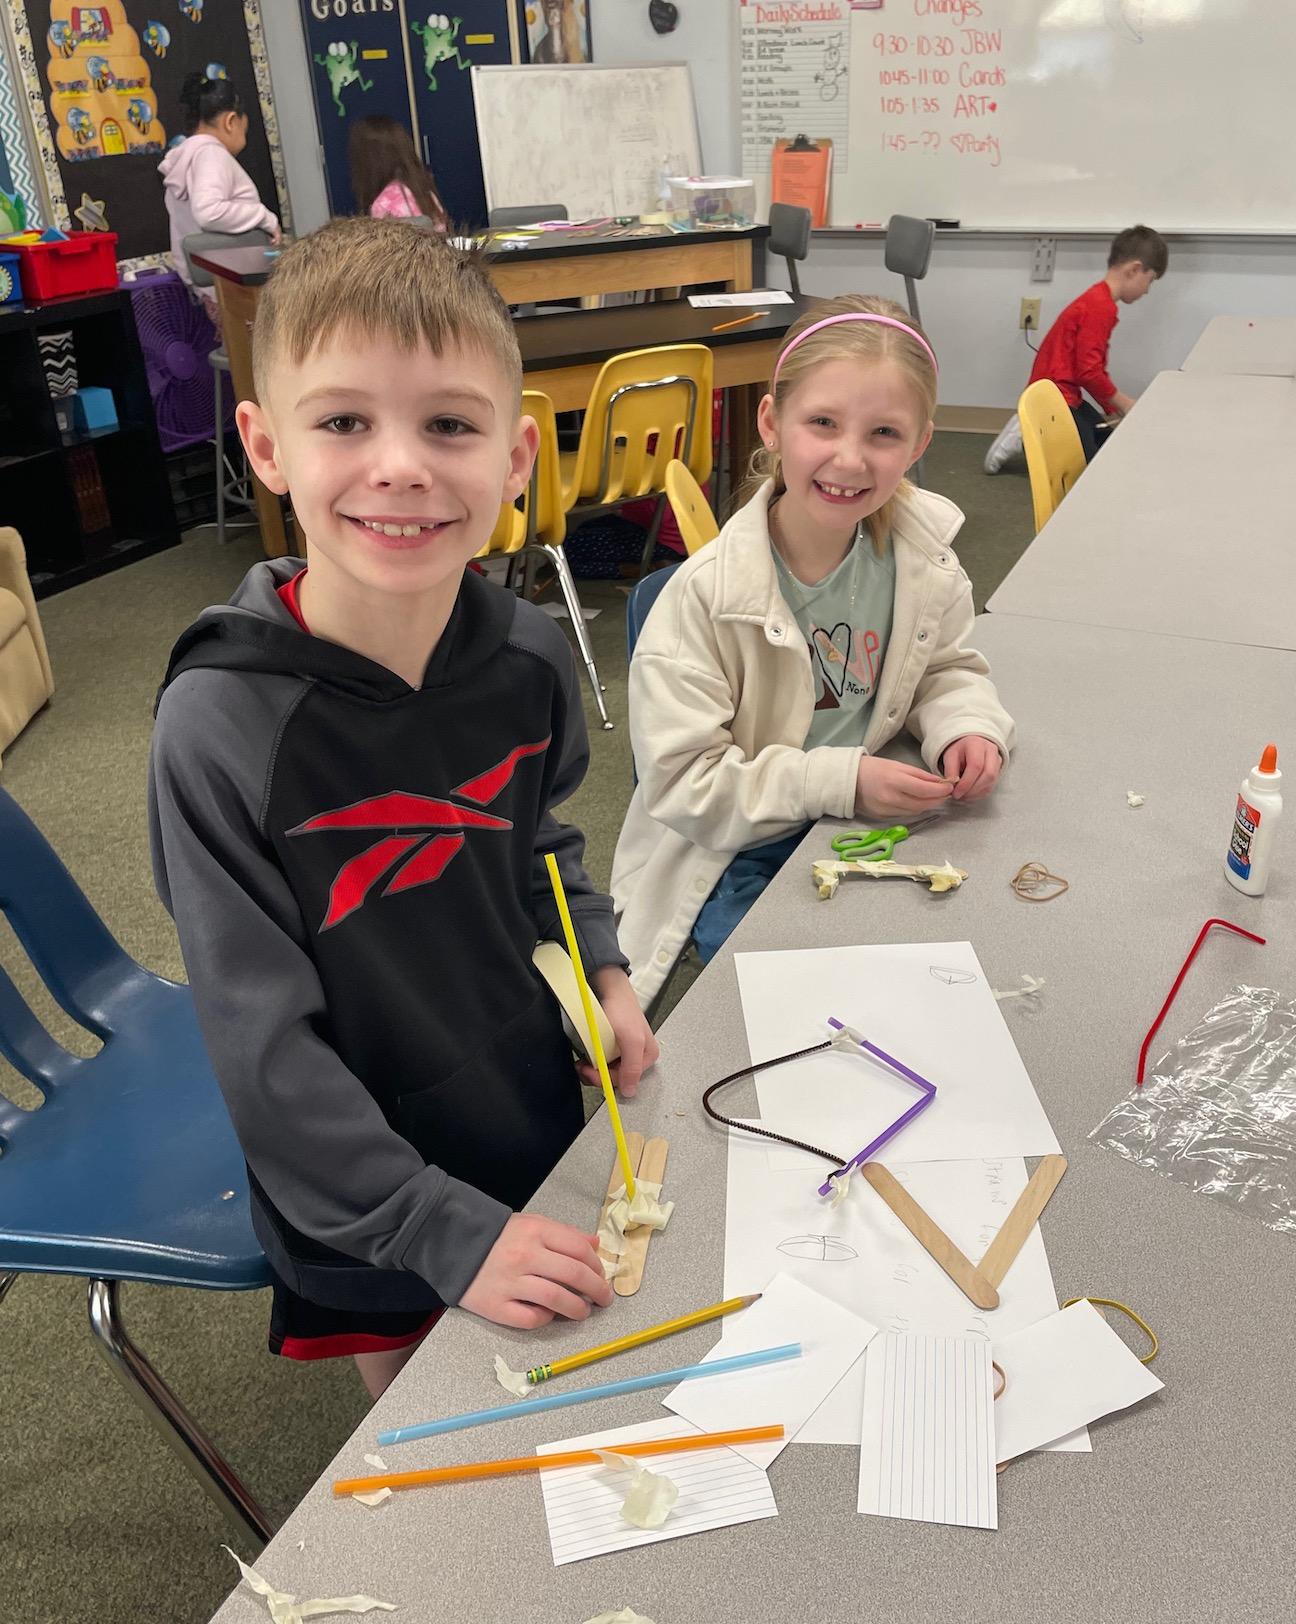 2nd-graders Enzo Mastroianni and Paisley Sullivan plan and build their device